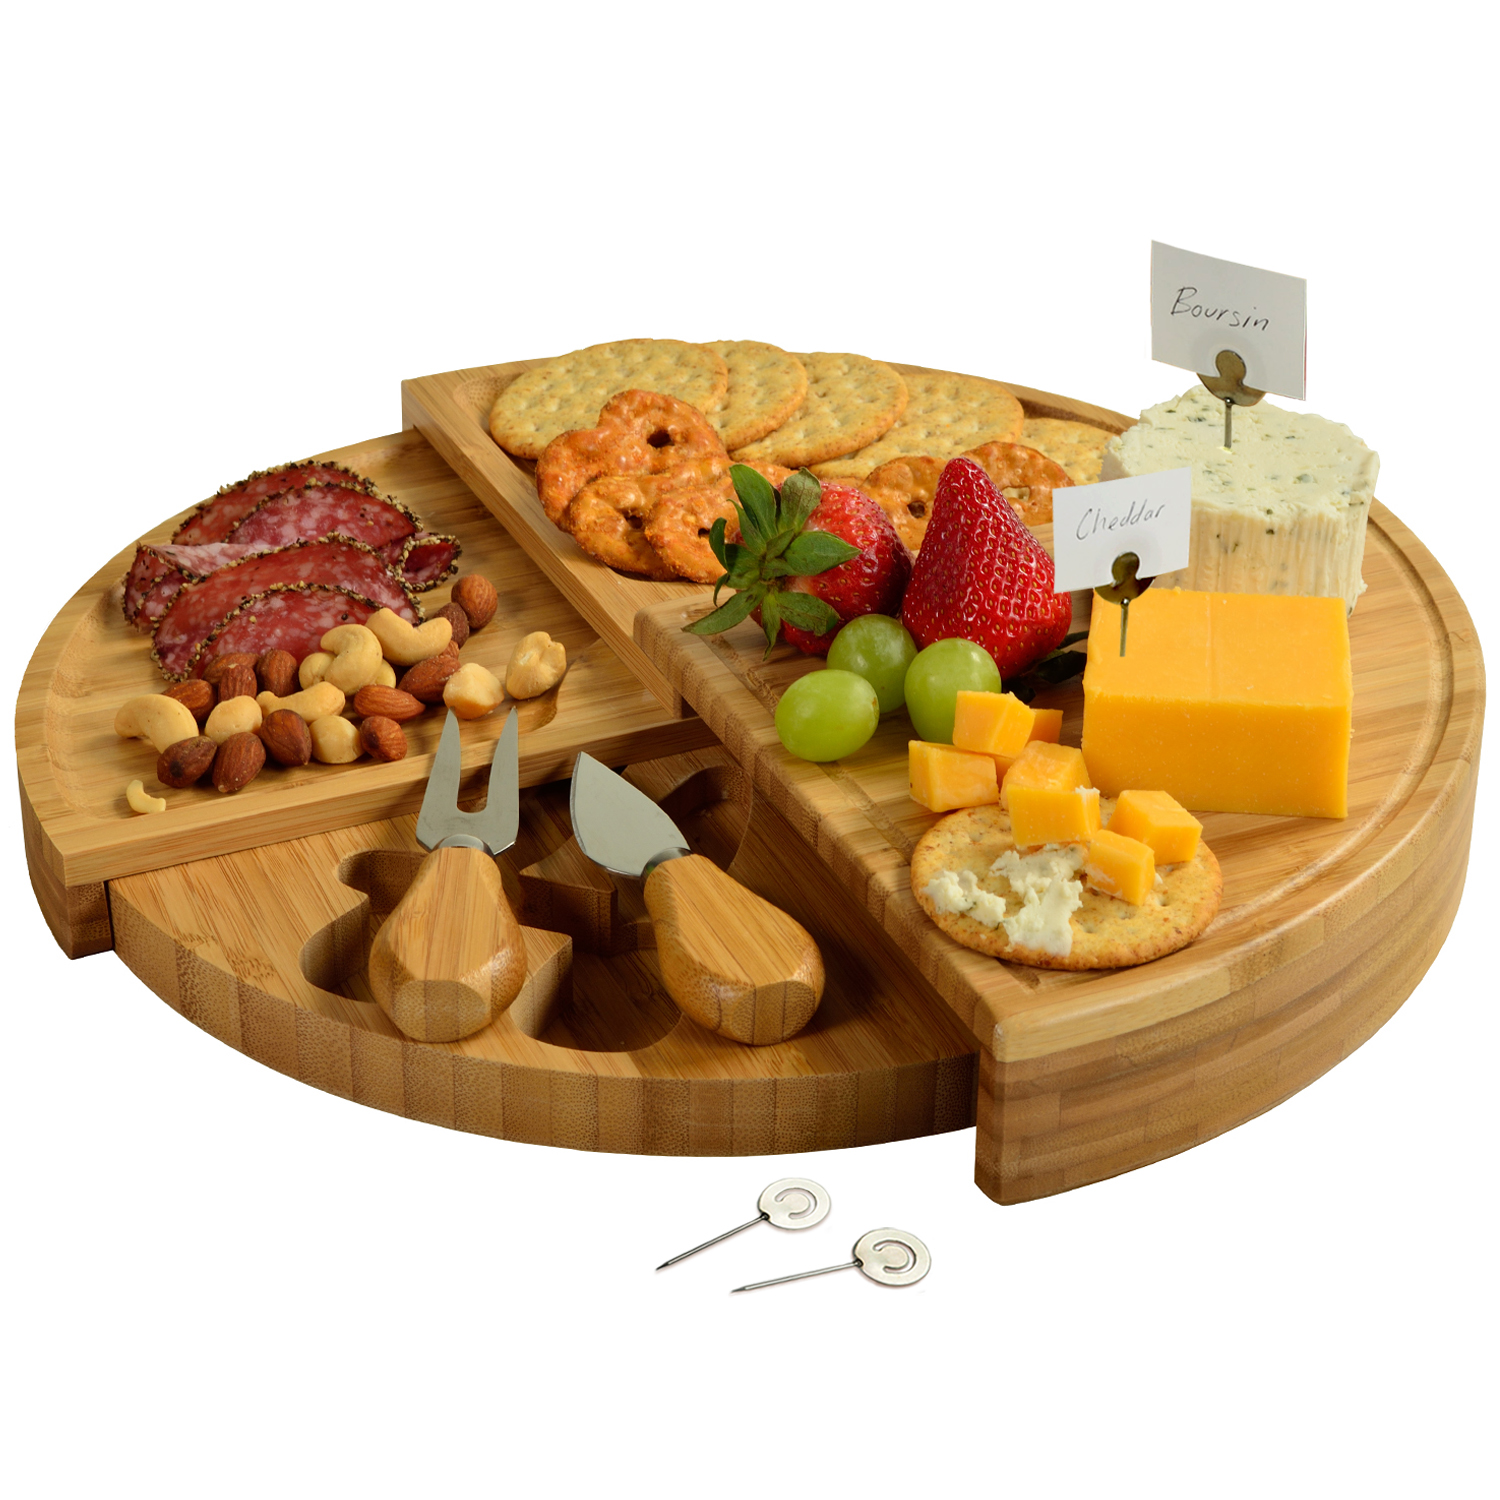 & Cheese Markers Picnic at Ascot Personalized Monogrammed Engraved Bamboo Cutting Board for Cheese & Charcuterie Platter- includes Knives Designed and Quality Checked in USA Ceramic Dish 